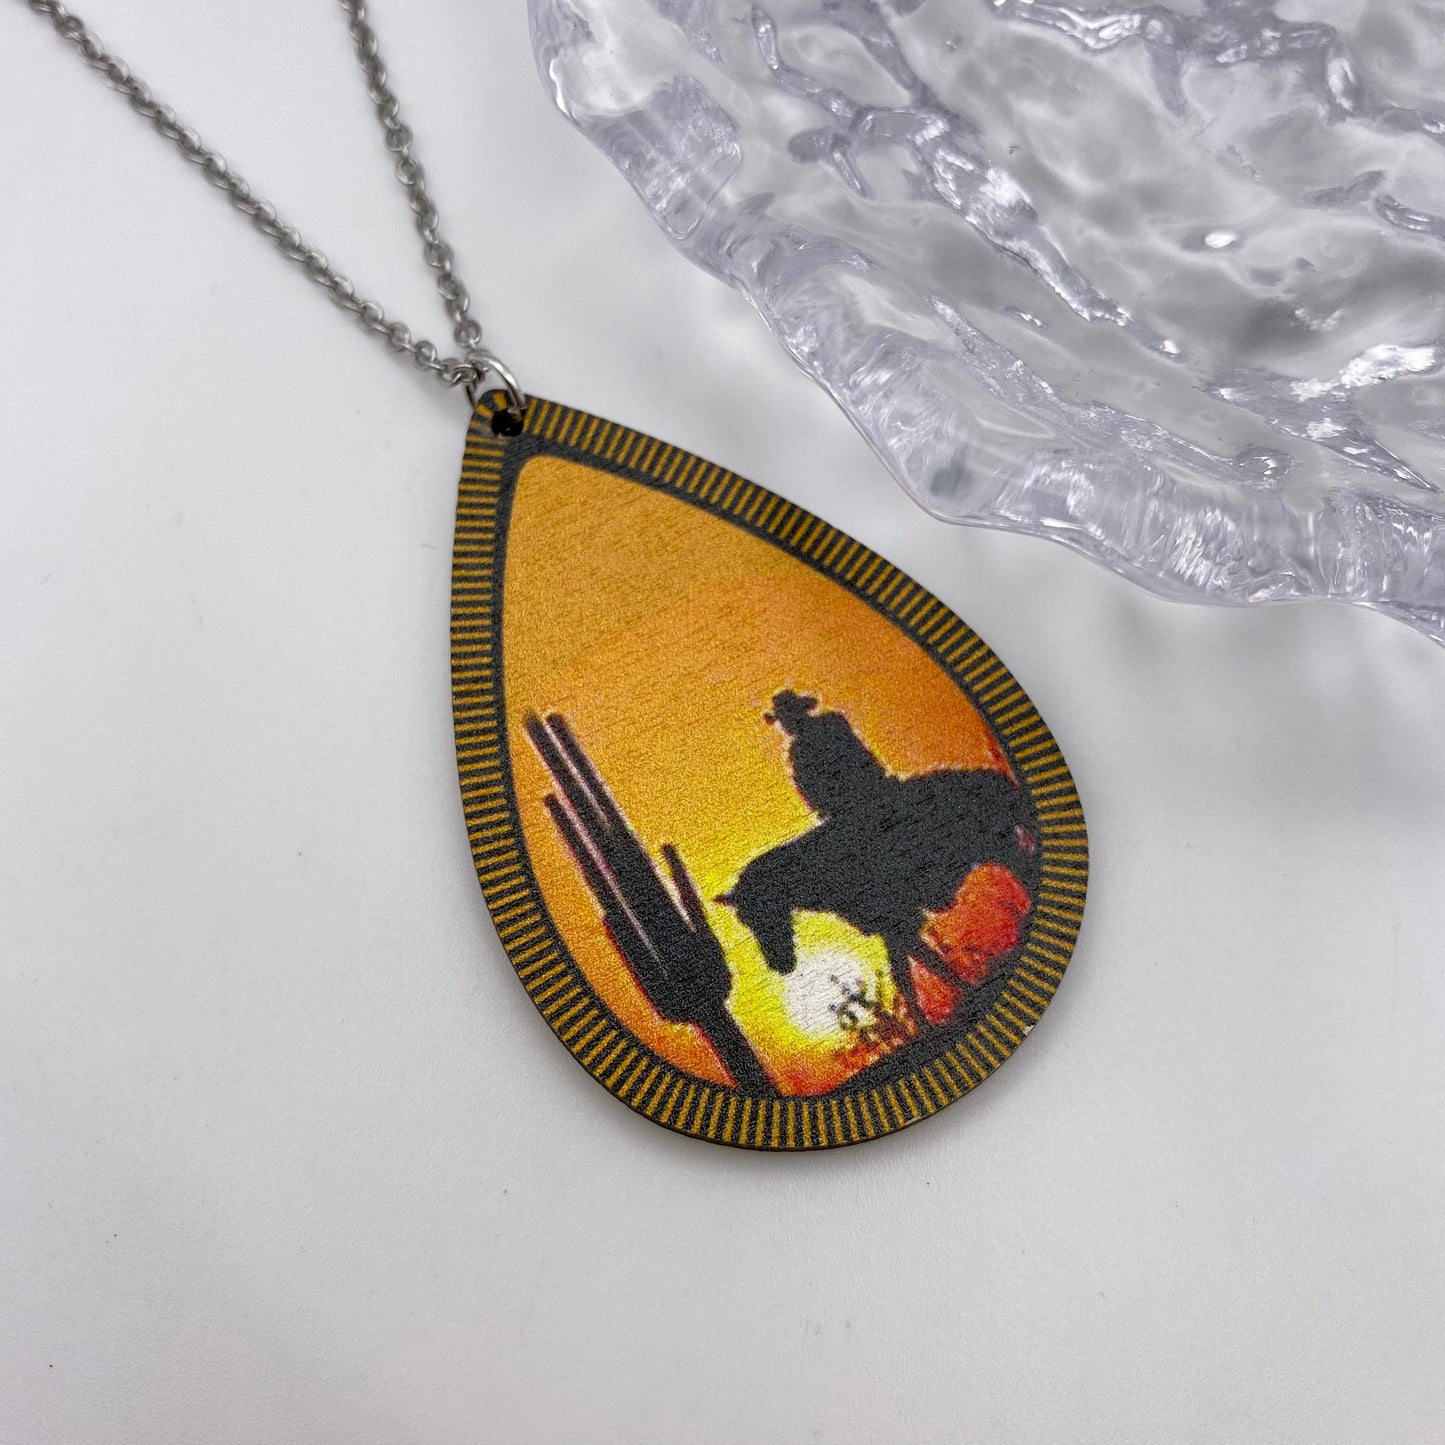 Old Western Pendant Necklace